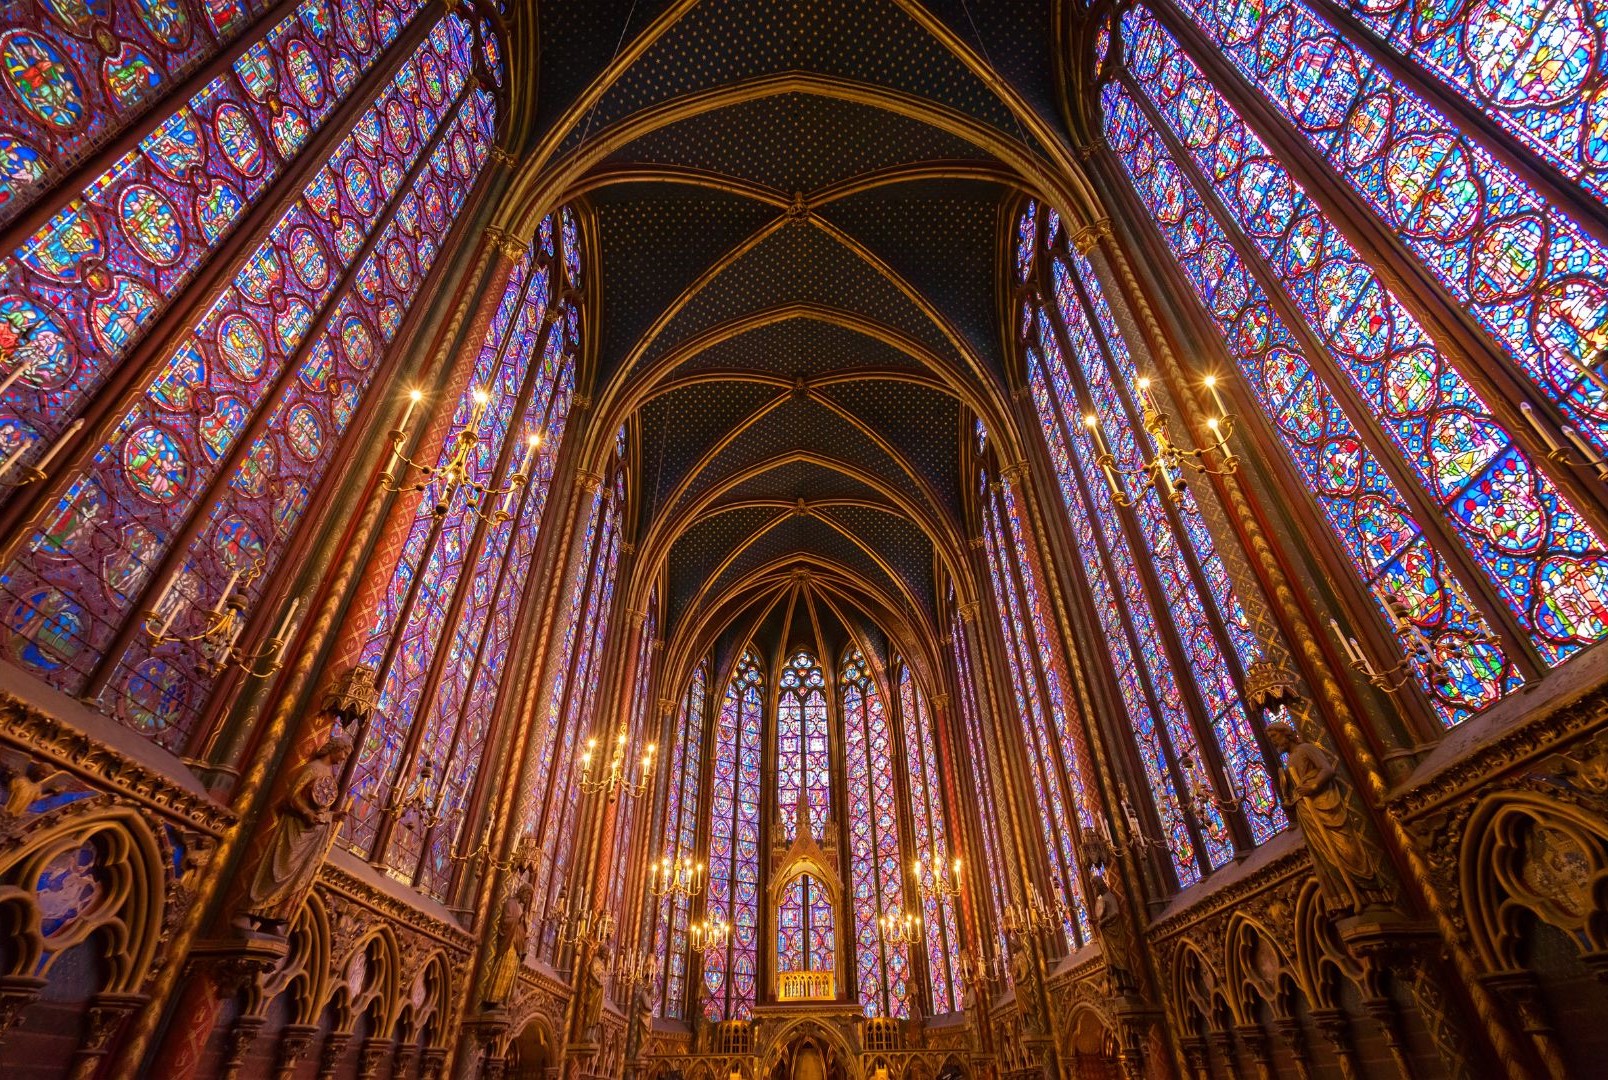 The soaring celestial spectacle of the Sainte-Chapelle